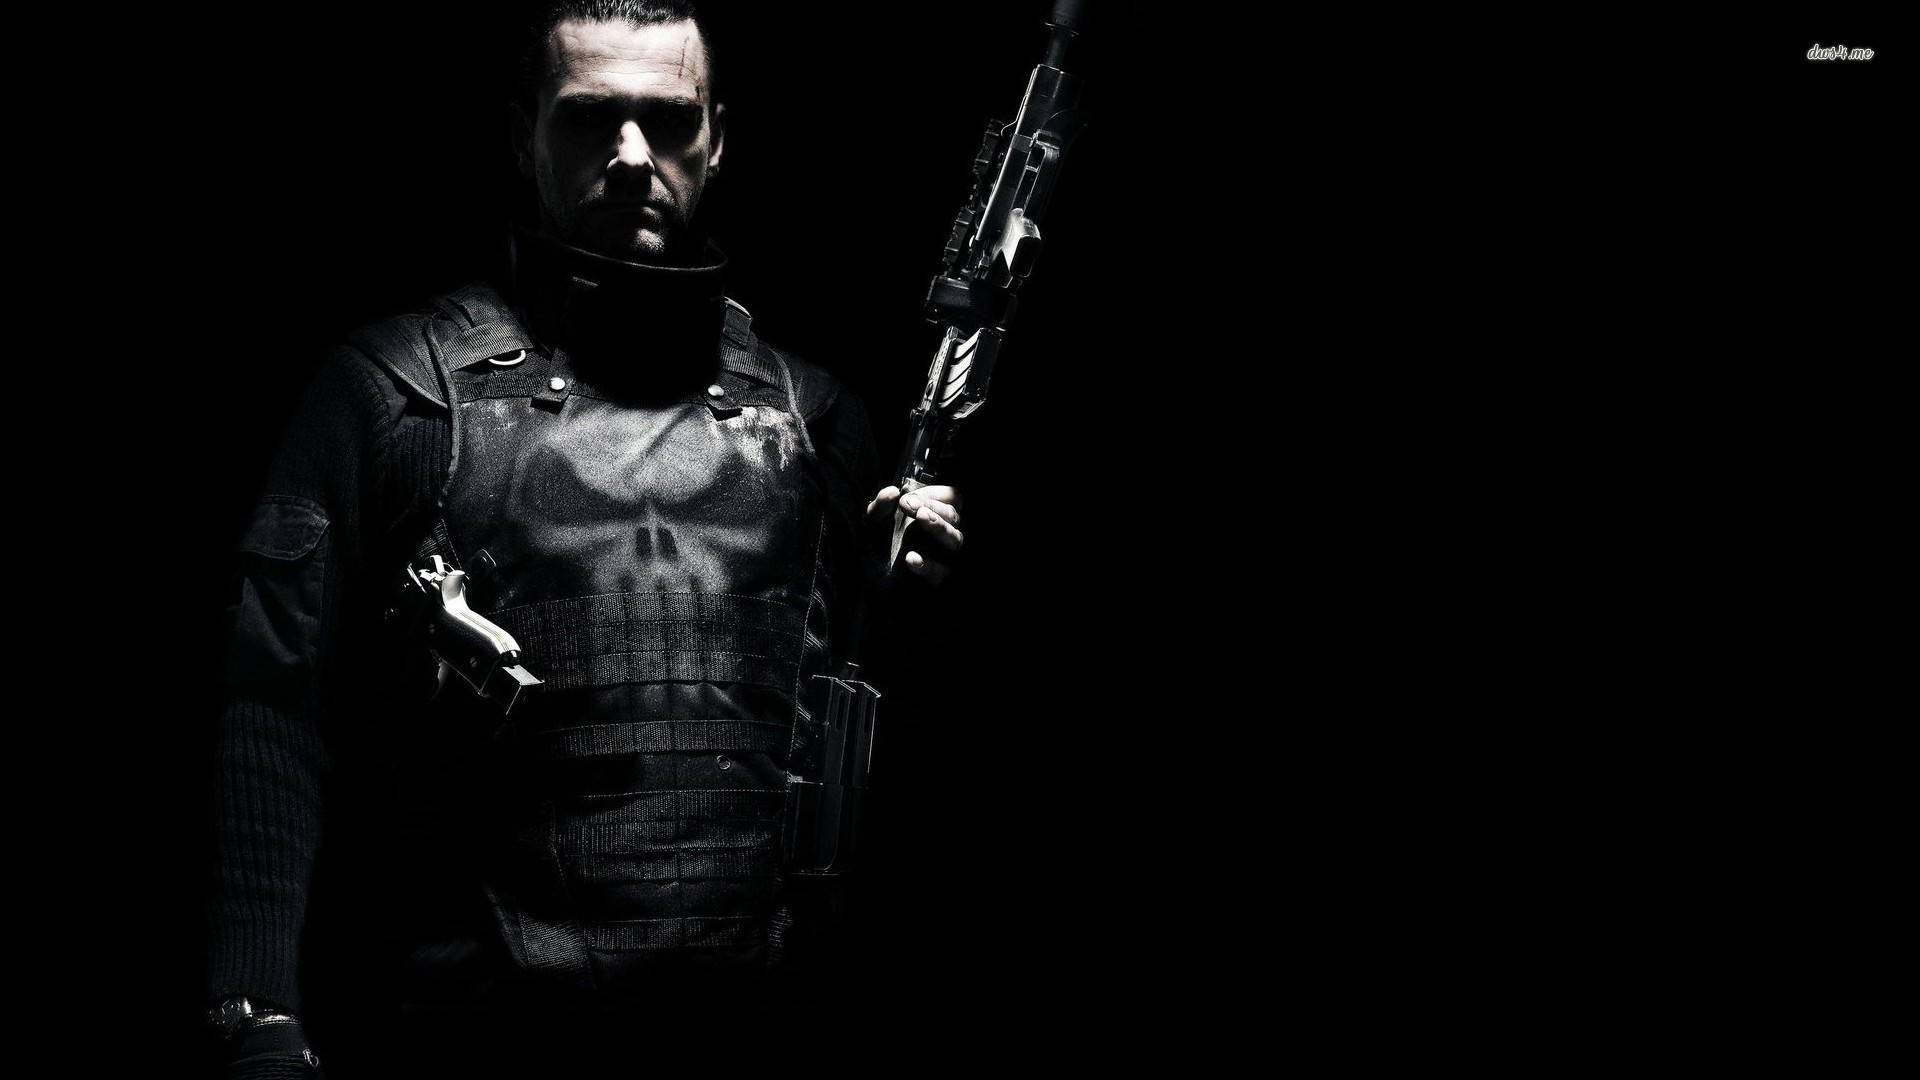 1920x1080 Punisher Wallpaper PC Attachment 16390 - HD Wallpapers Site